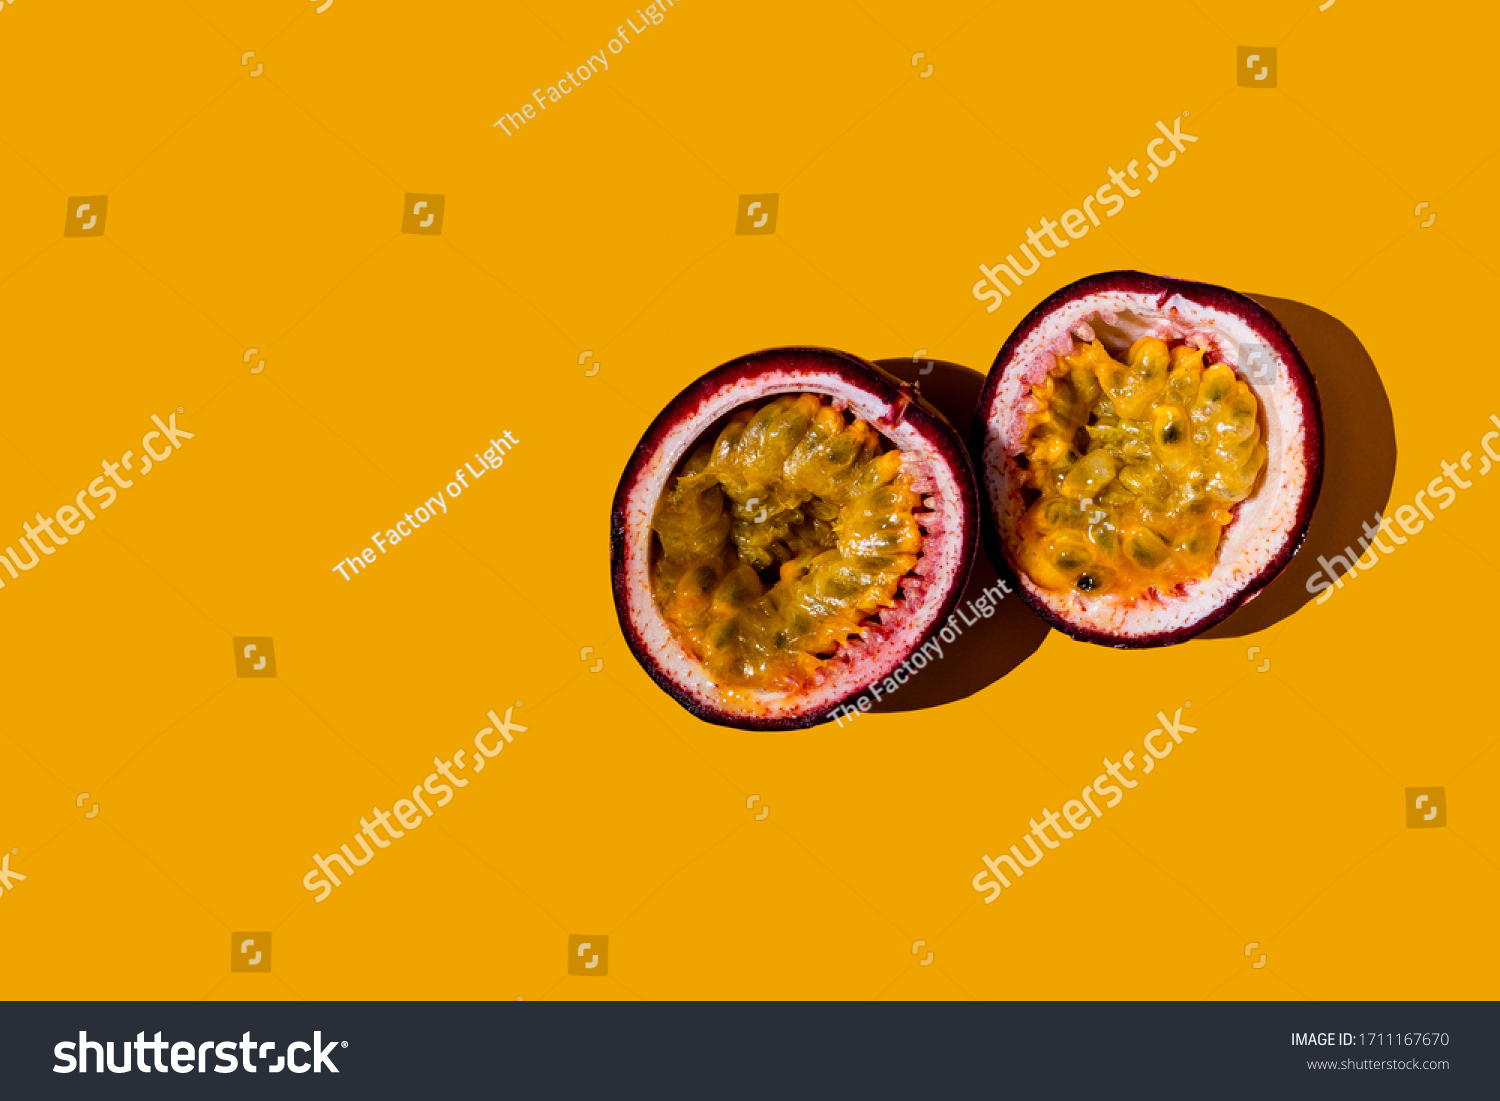 Cut passion fruit on a yellow background. #1711167670